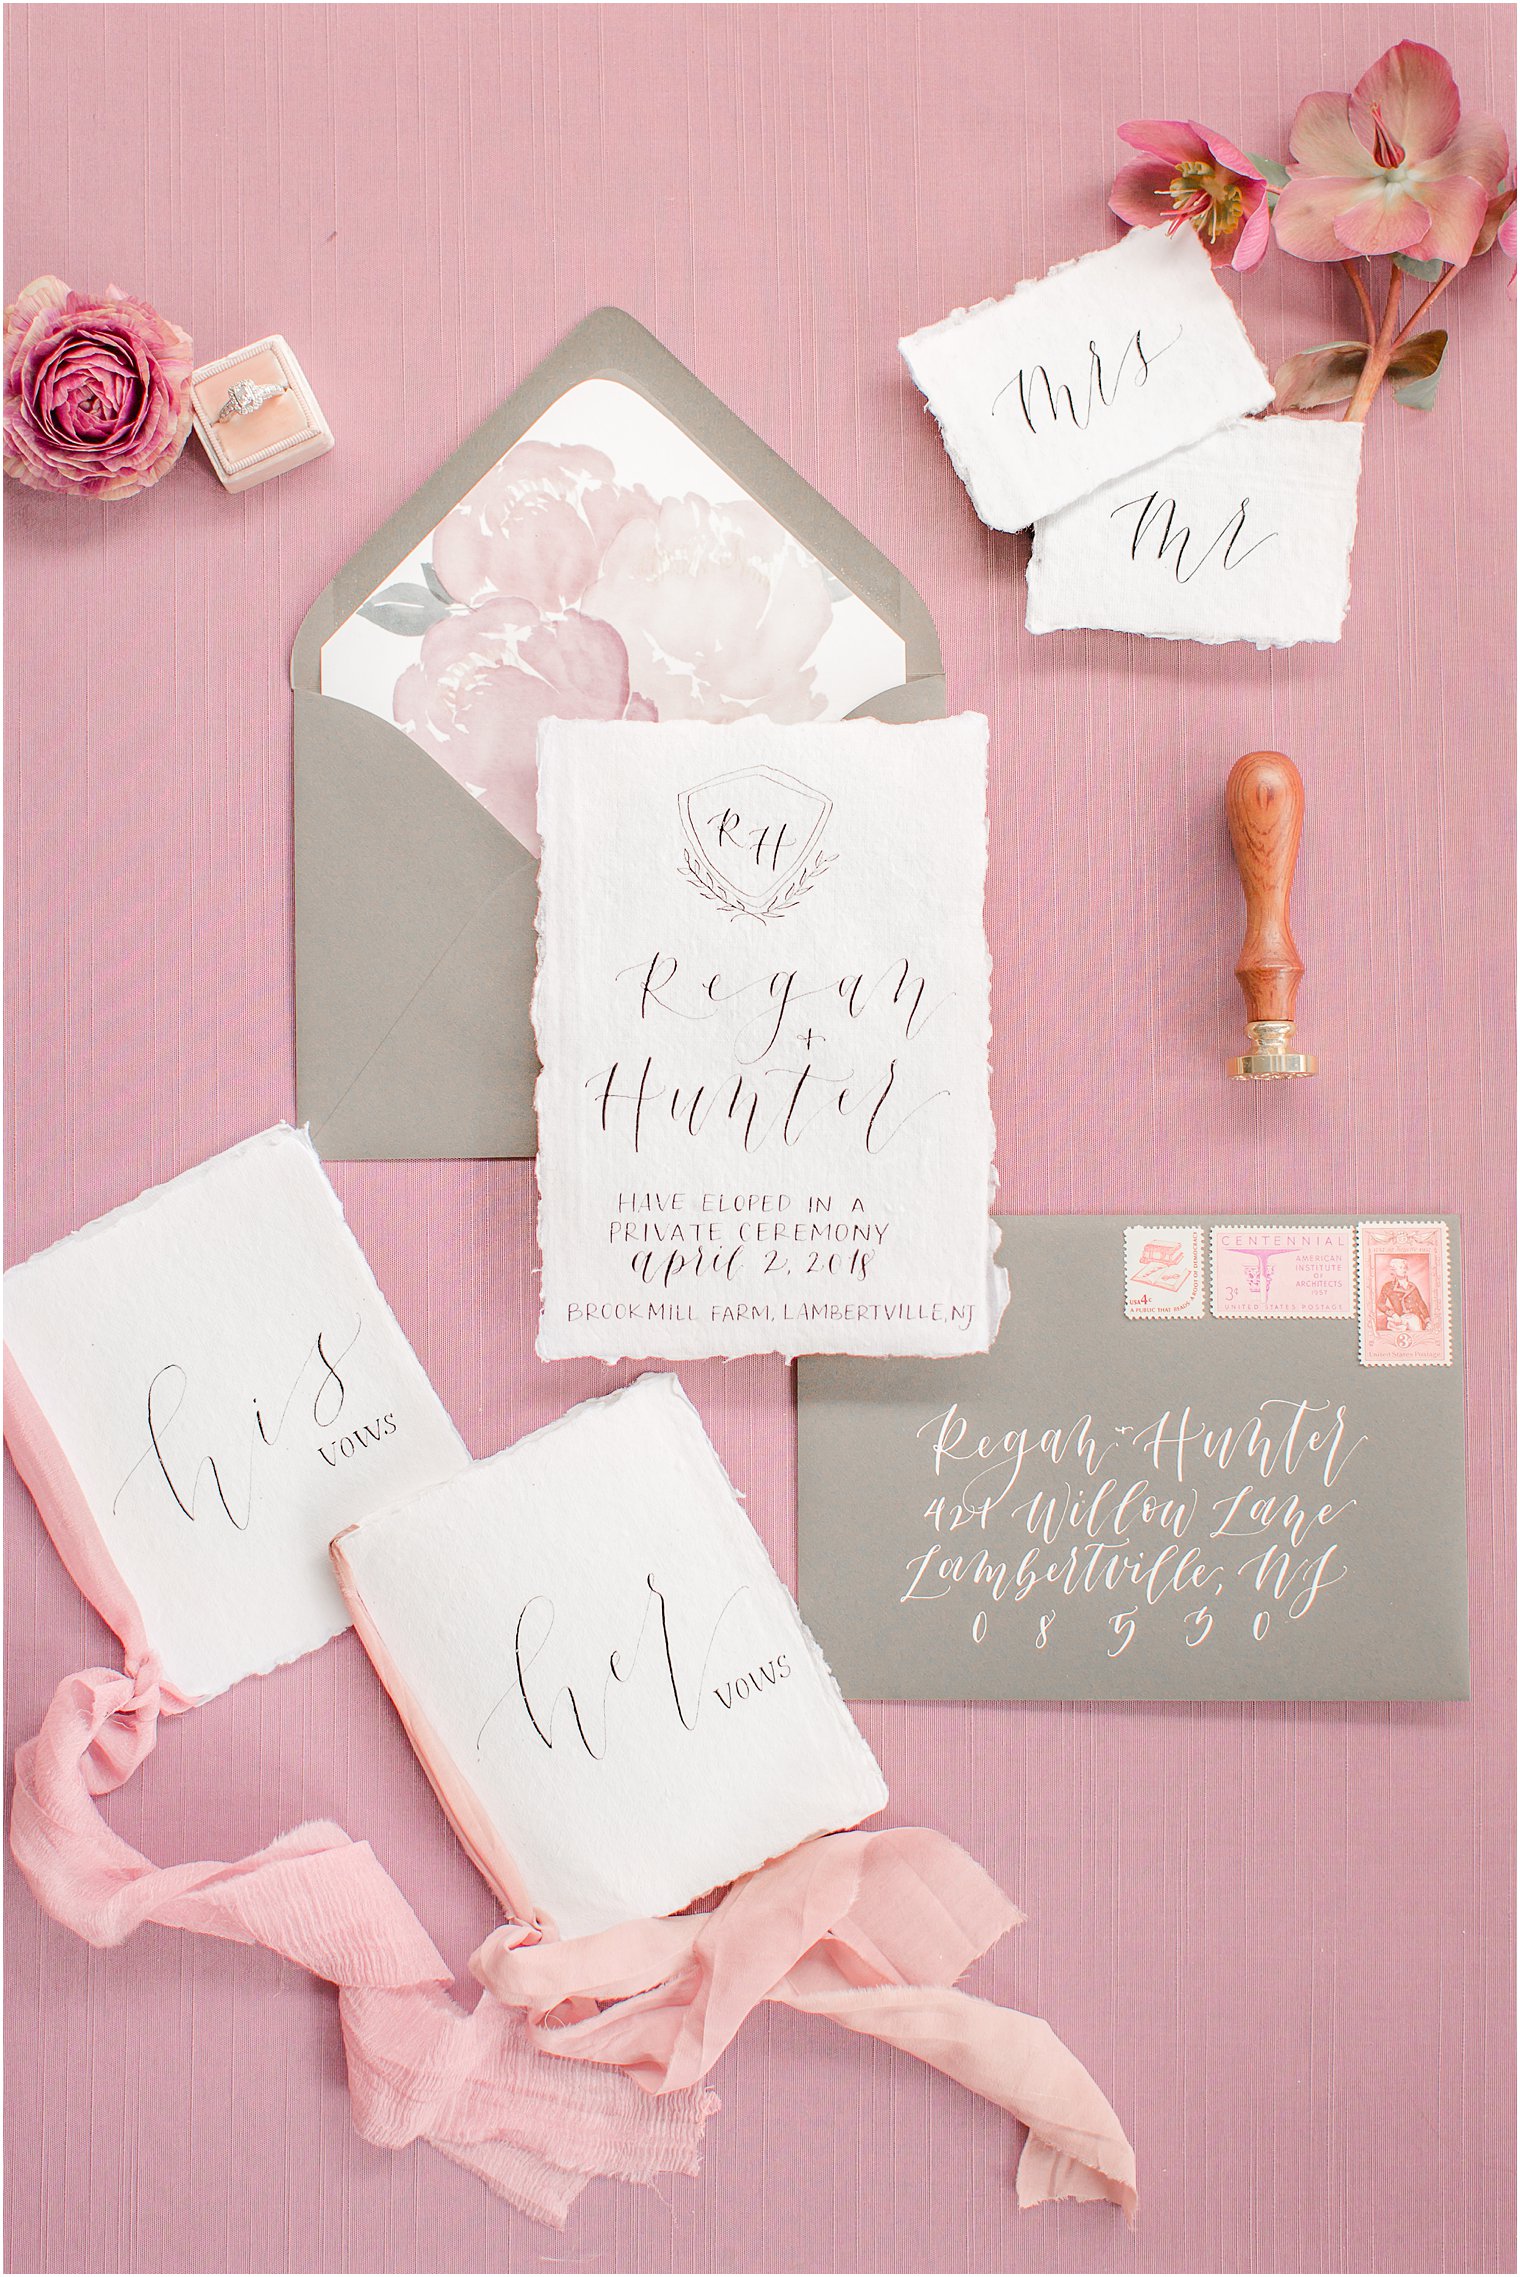 grey and pink invitations suite by The Shaded Maple